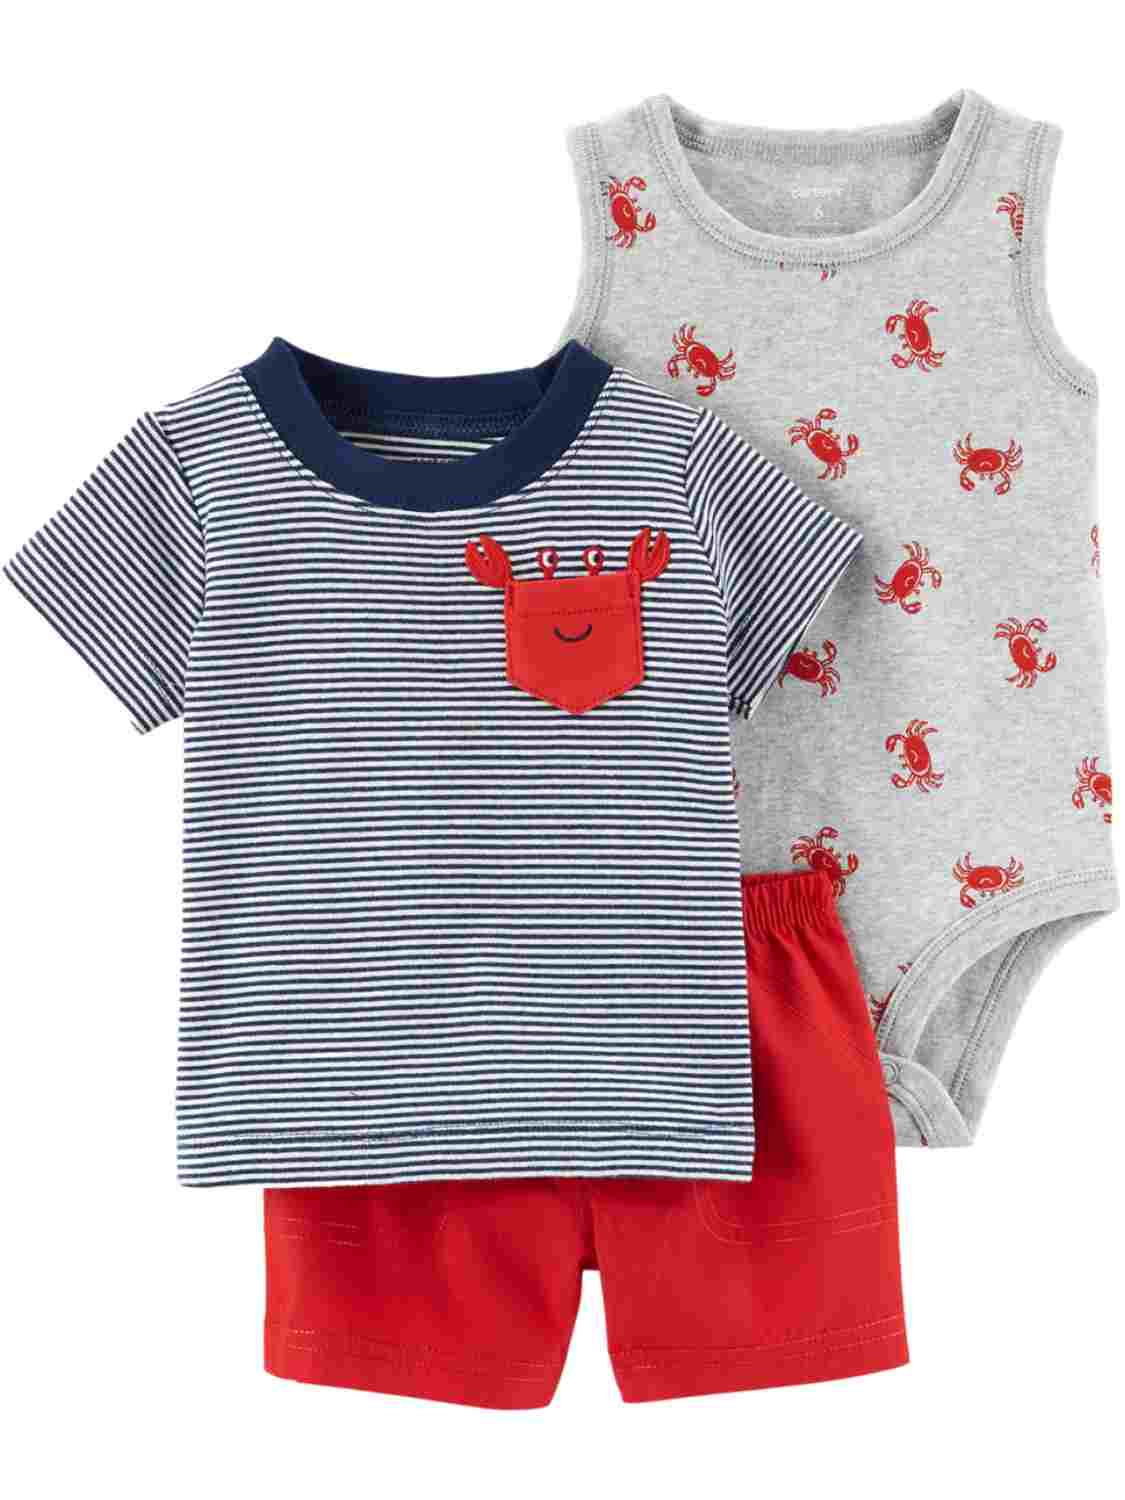 Carter's Carters Infant Boys 3pc Crab Baby Outfit Bodysuit Shirt & Red Shorts Set